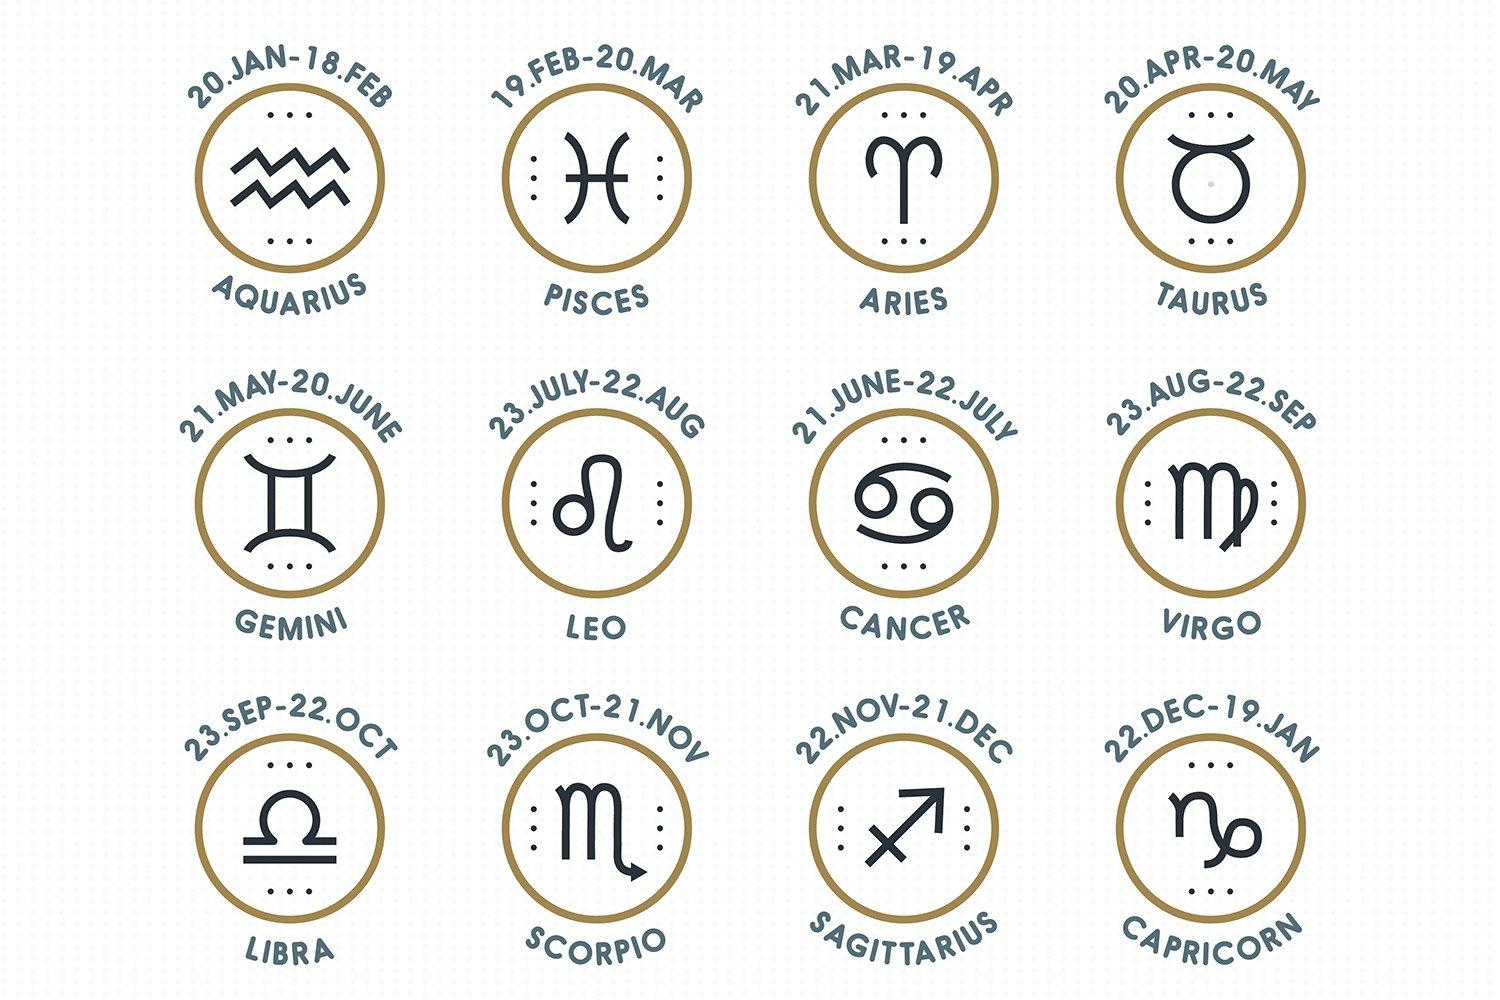 astrology sign of july 27